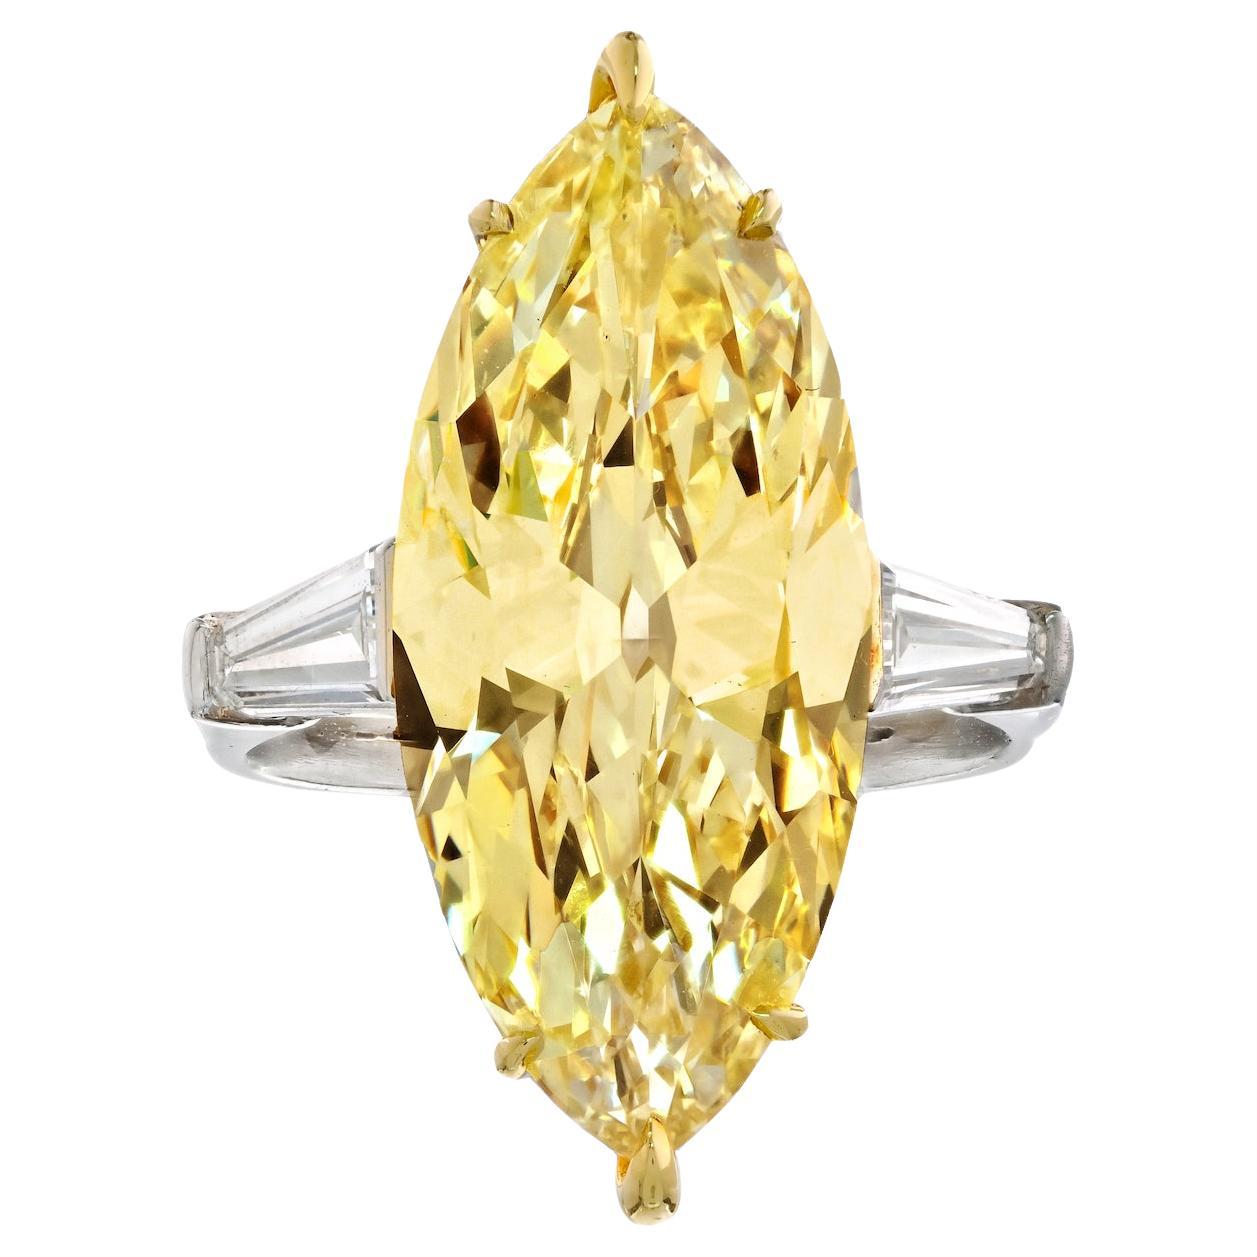 9.33ct Fancy Light Yellow Marquise Cut GIA Diamond Engagement Ring